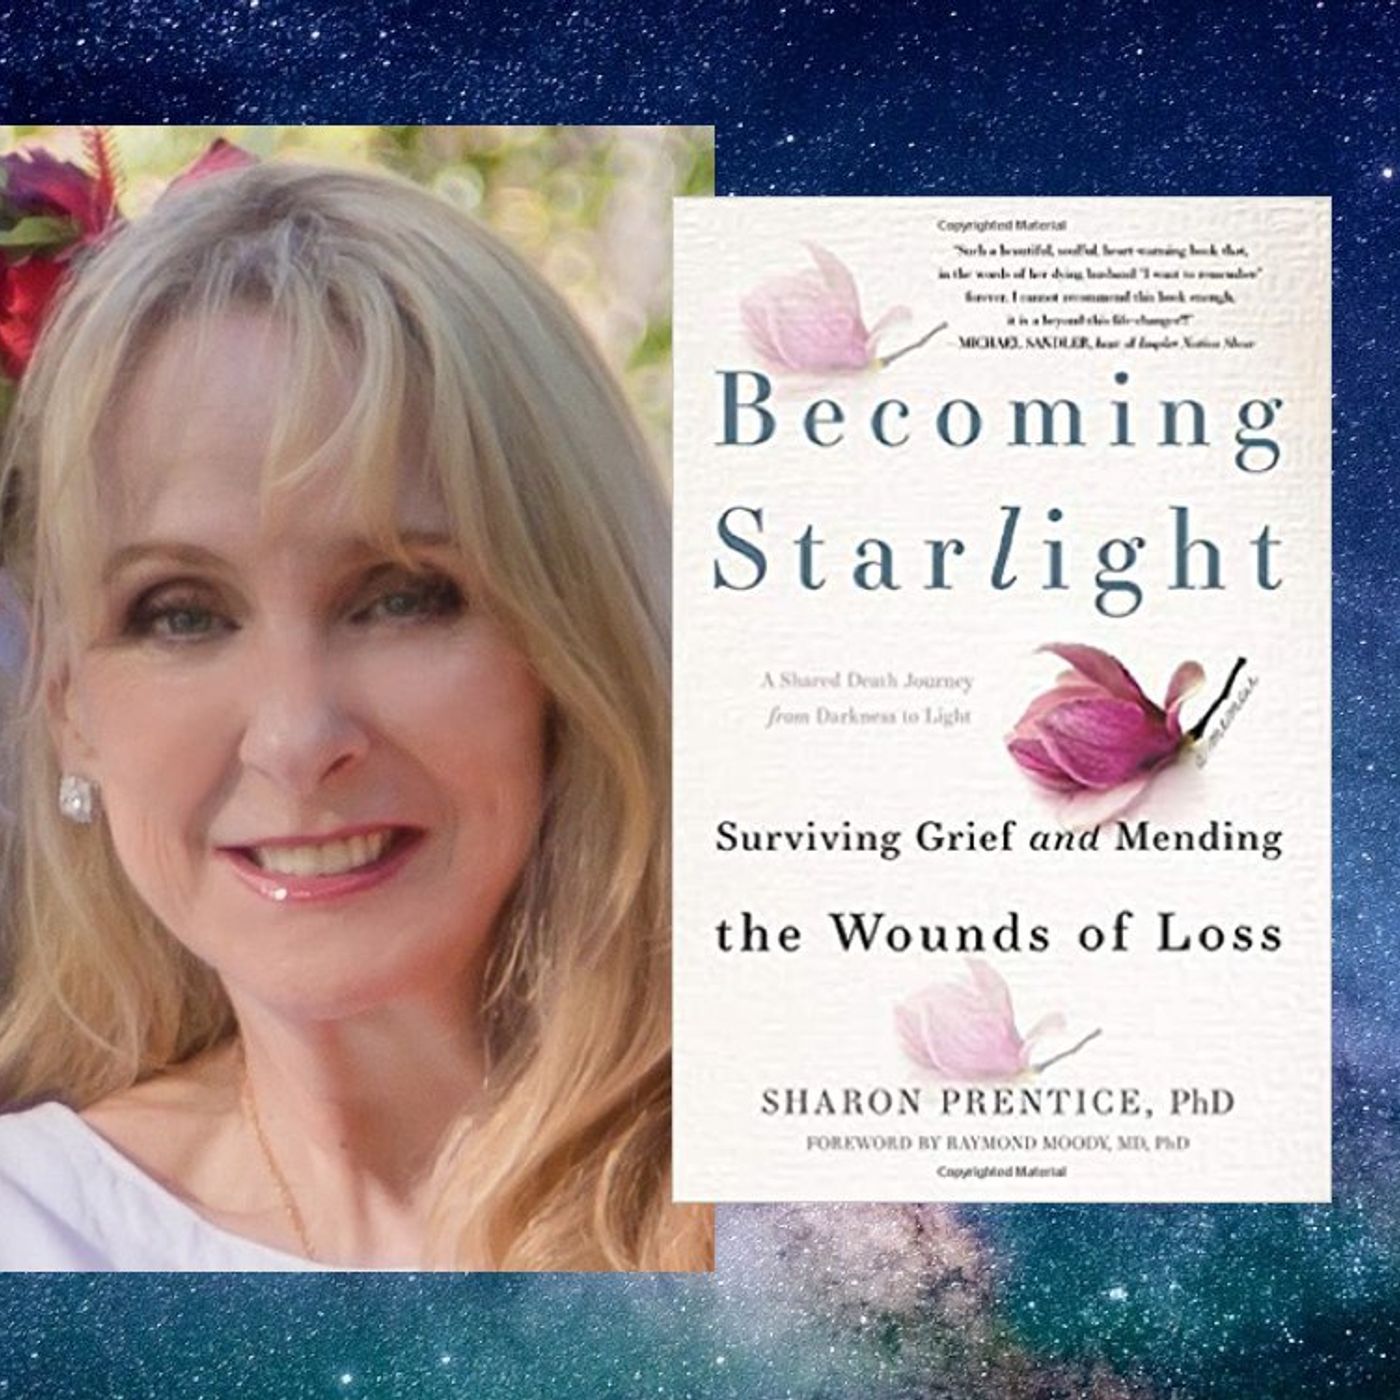 Becoming Starlight with Sharon Prentice PhD